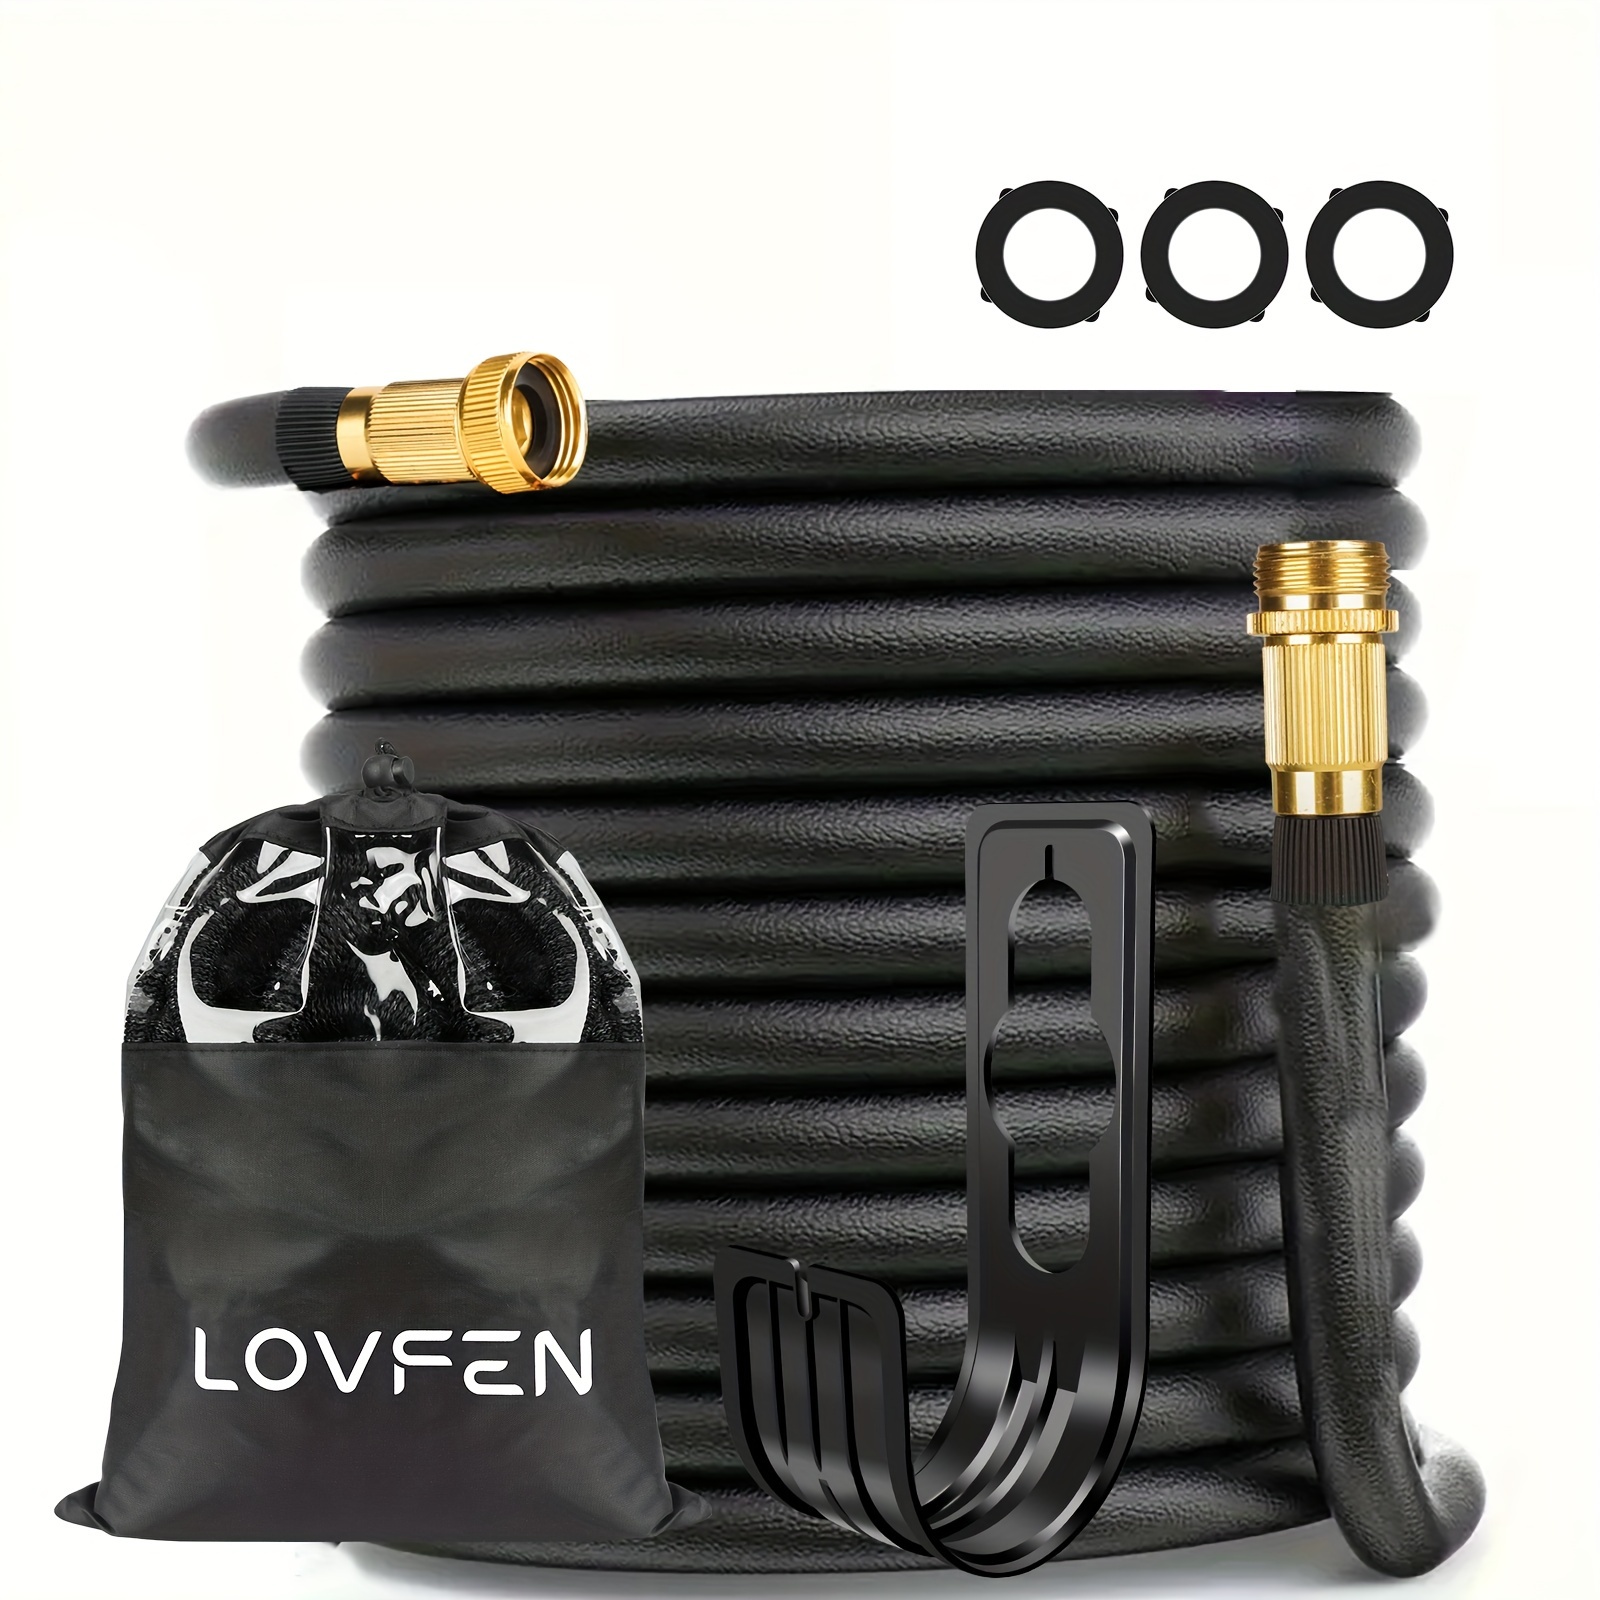 

25/50/75/100/150ft Heavy-duty Expandable Garden Hose With 3/4 Solid Brass Fittings, Leakproof Design, Durable Rubber Material, Perfect For Cleaning, Forestry, And Gardening Black